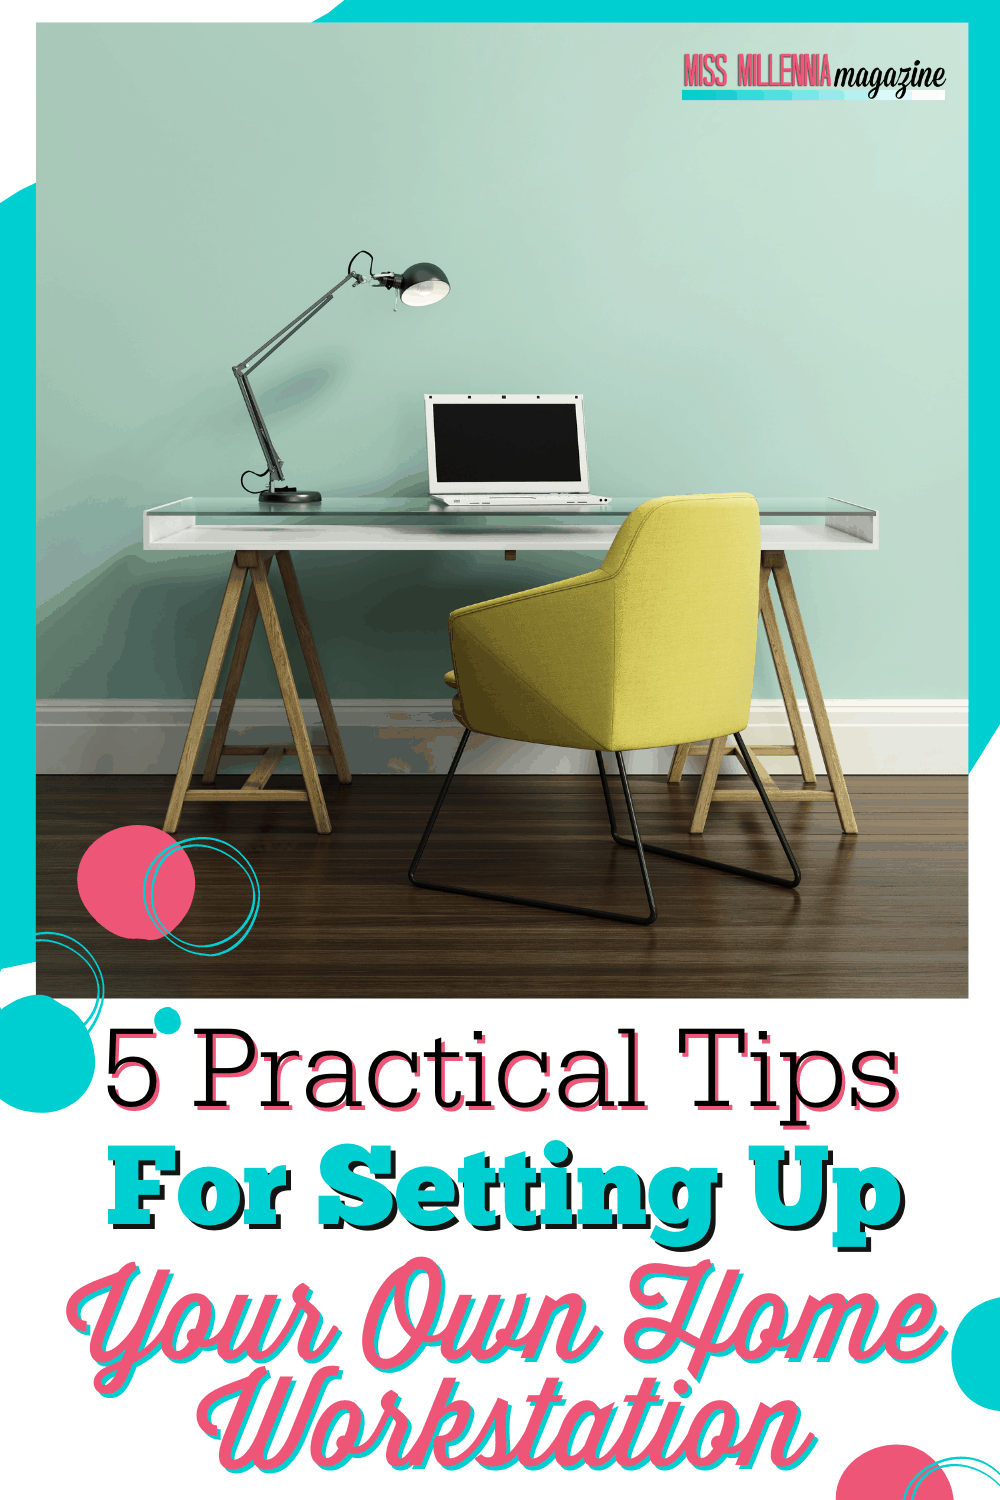 5 Practical Tips for Setting Up Your Own Home Workstation